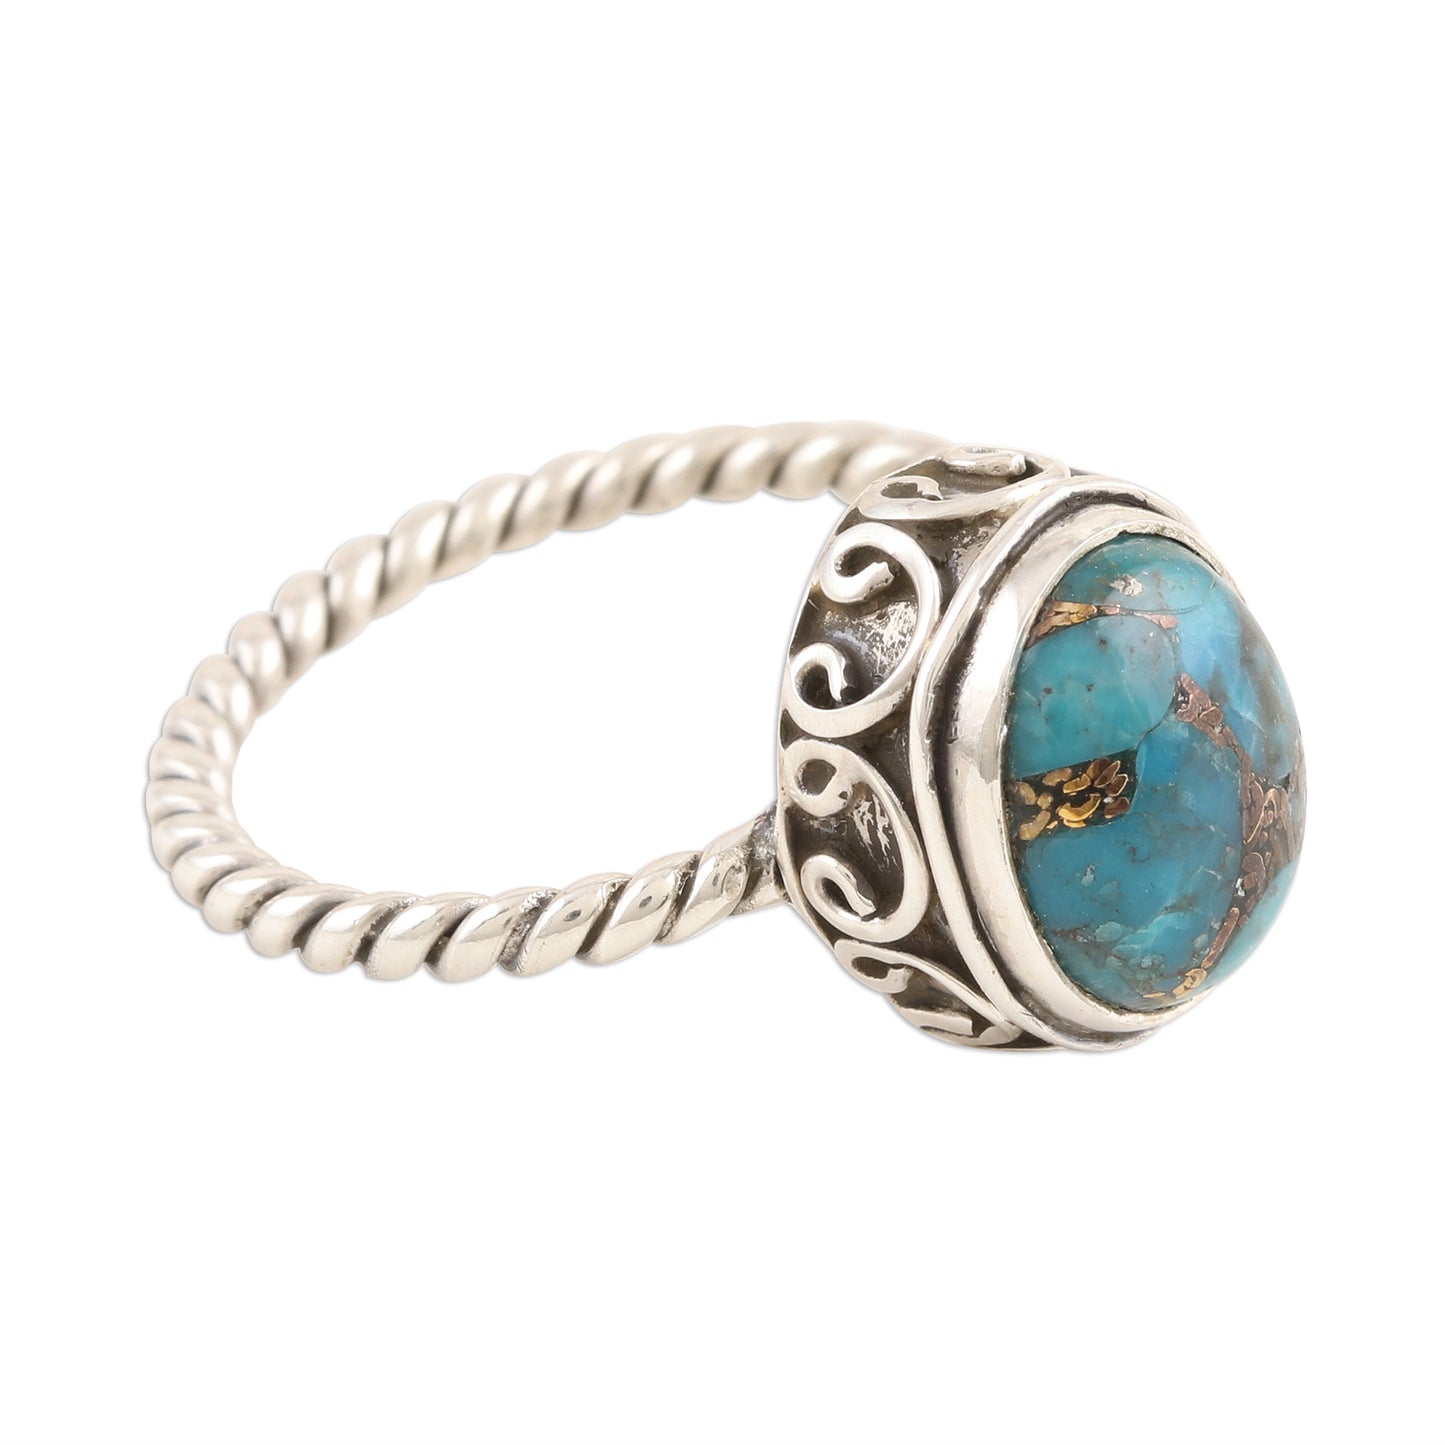 Adorable Azure Sterling Silver and Composite Turquoise Ring